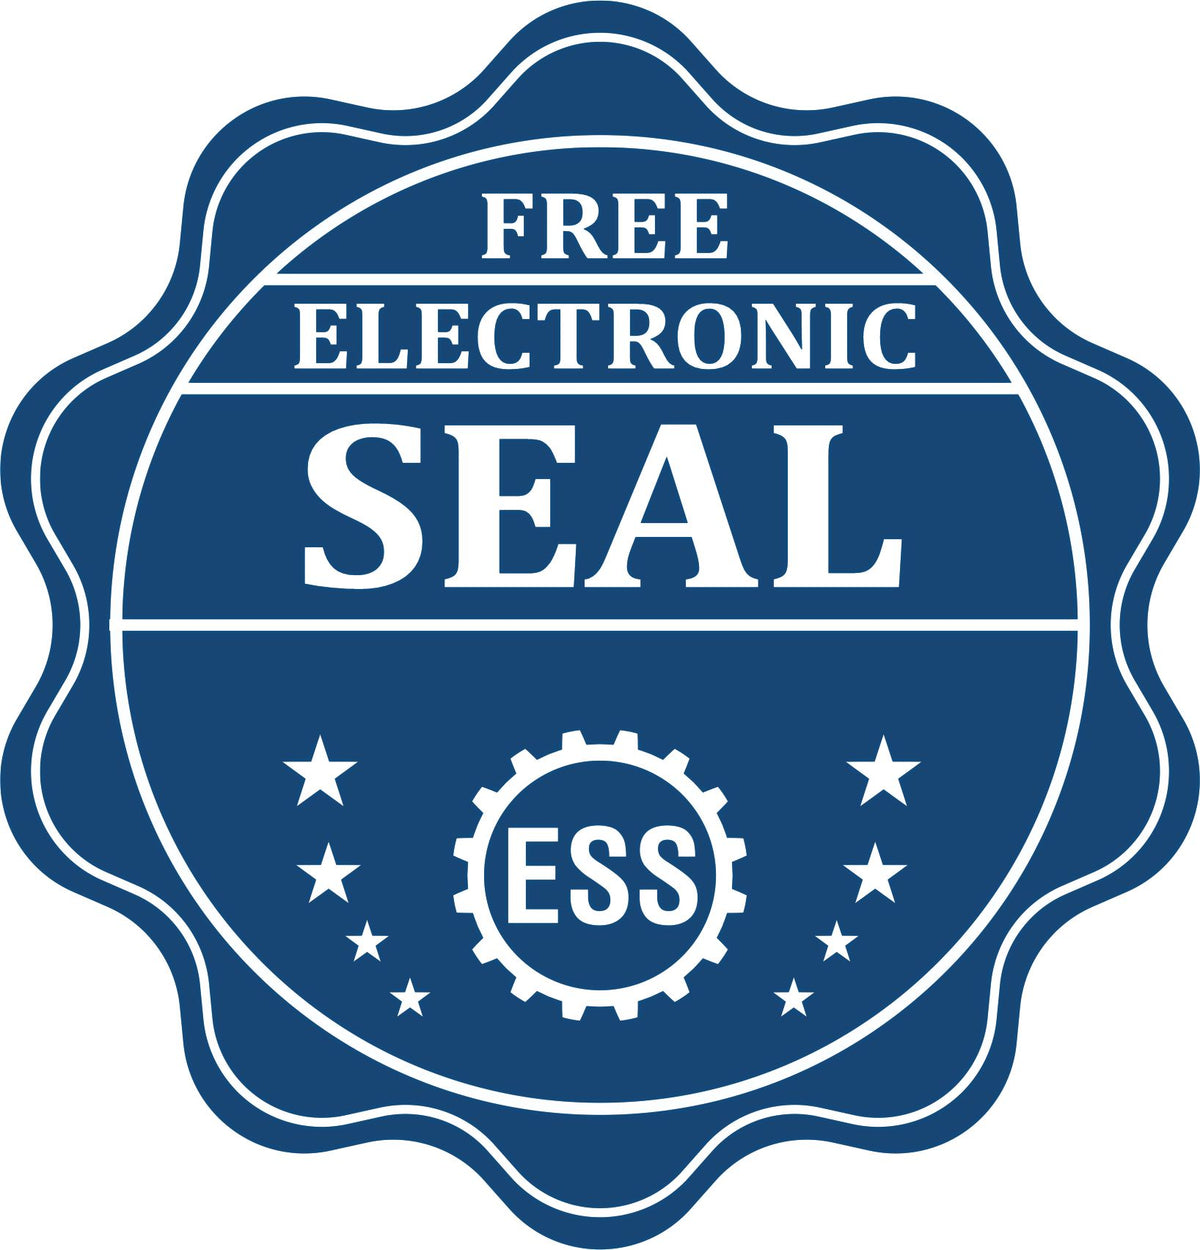 A badge showing a free electronic seal for the Soft Montana Professional Geologist Seal with stars and the ESS gear on the emblem.